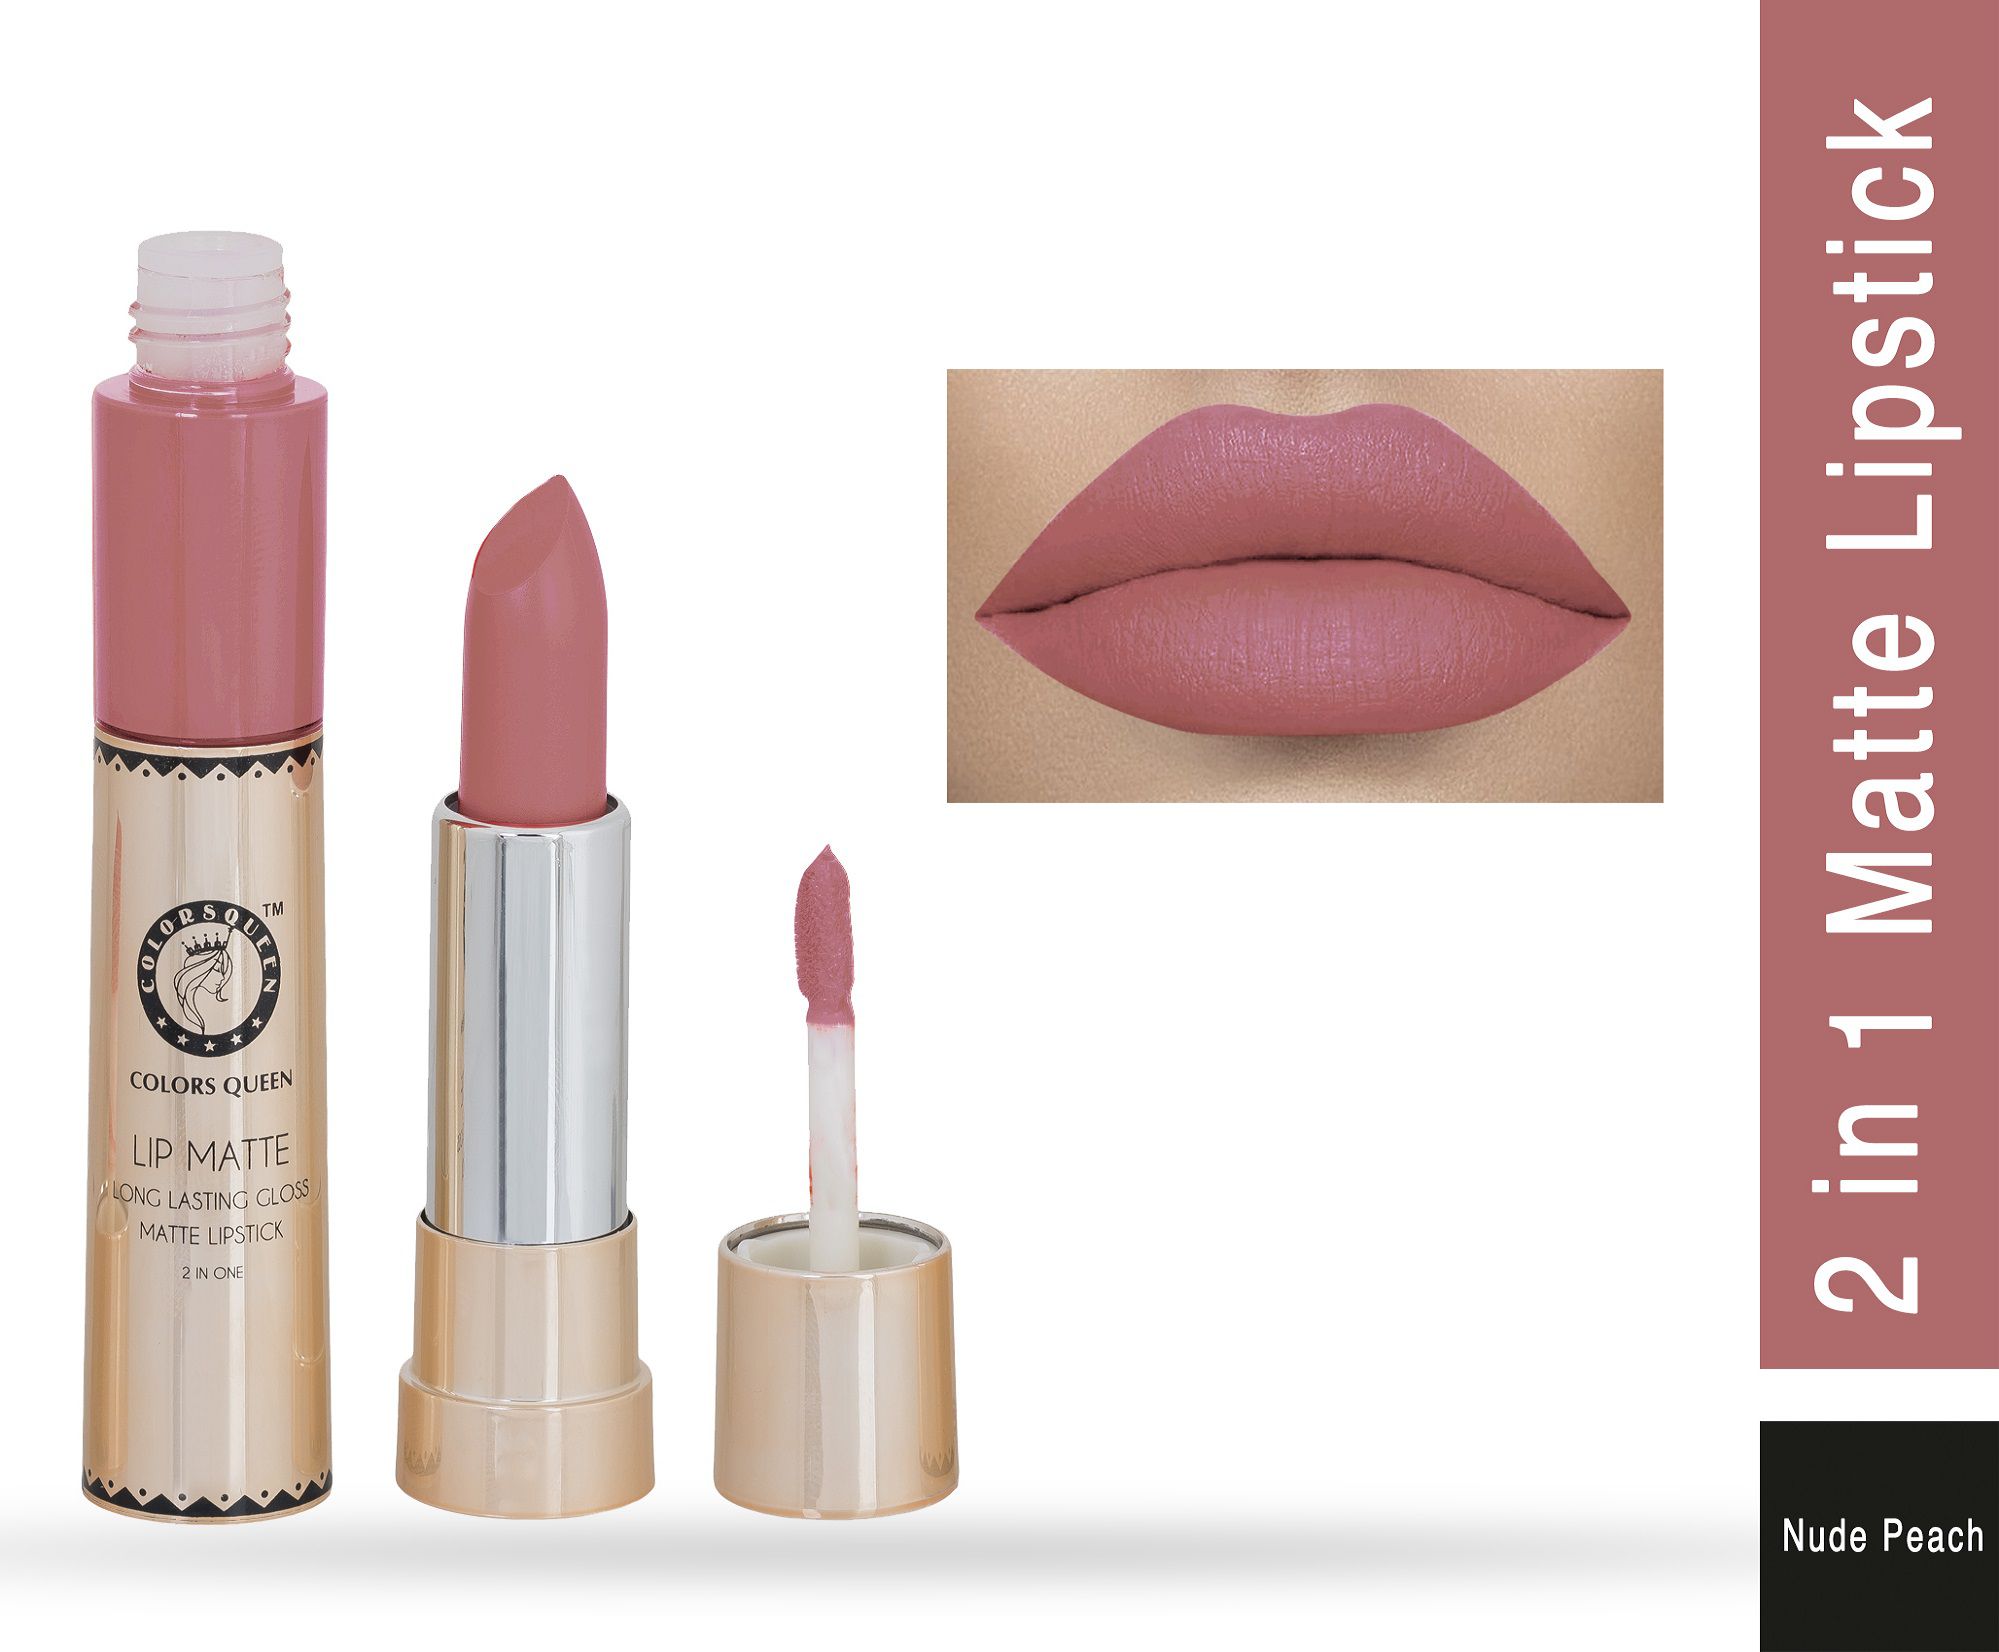     			Colors Queen 2 in 1 Lipstick Nude Peach Shade - 49 | SPF 15 8 g